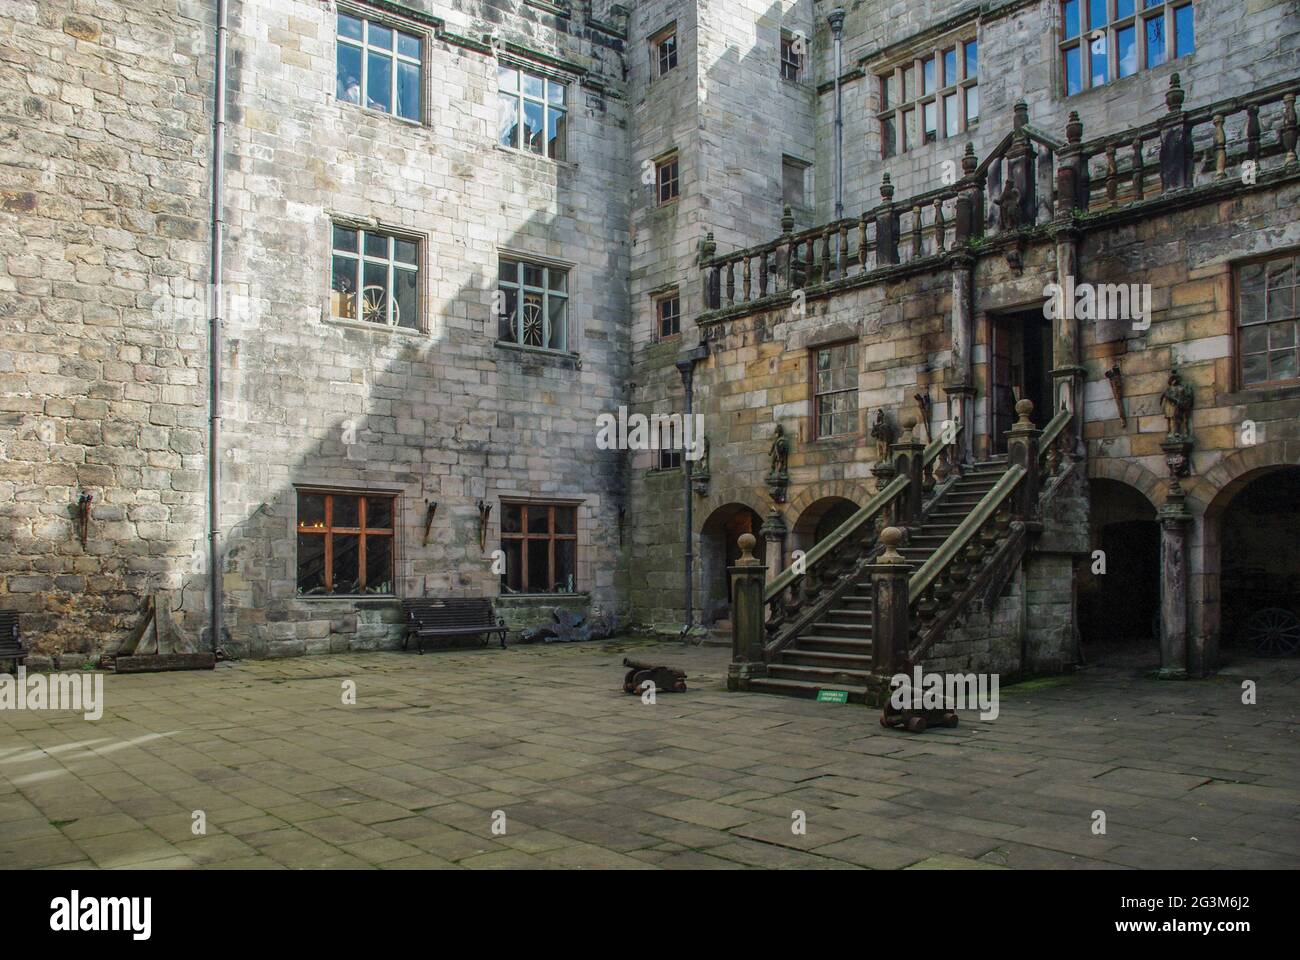 Courtyard entrance to the 13th century Chillingham Castle, a well known visitor attraction, Northumberland, UK Stock Photo